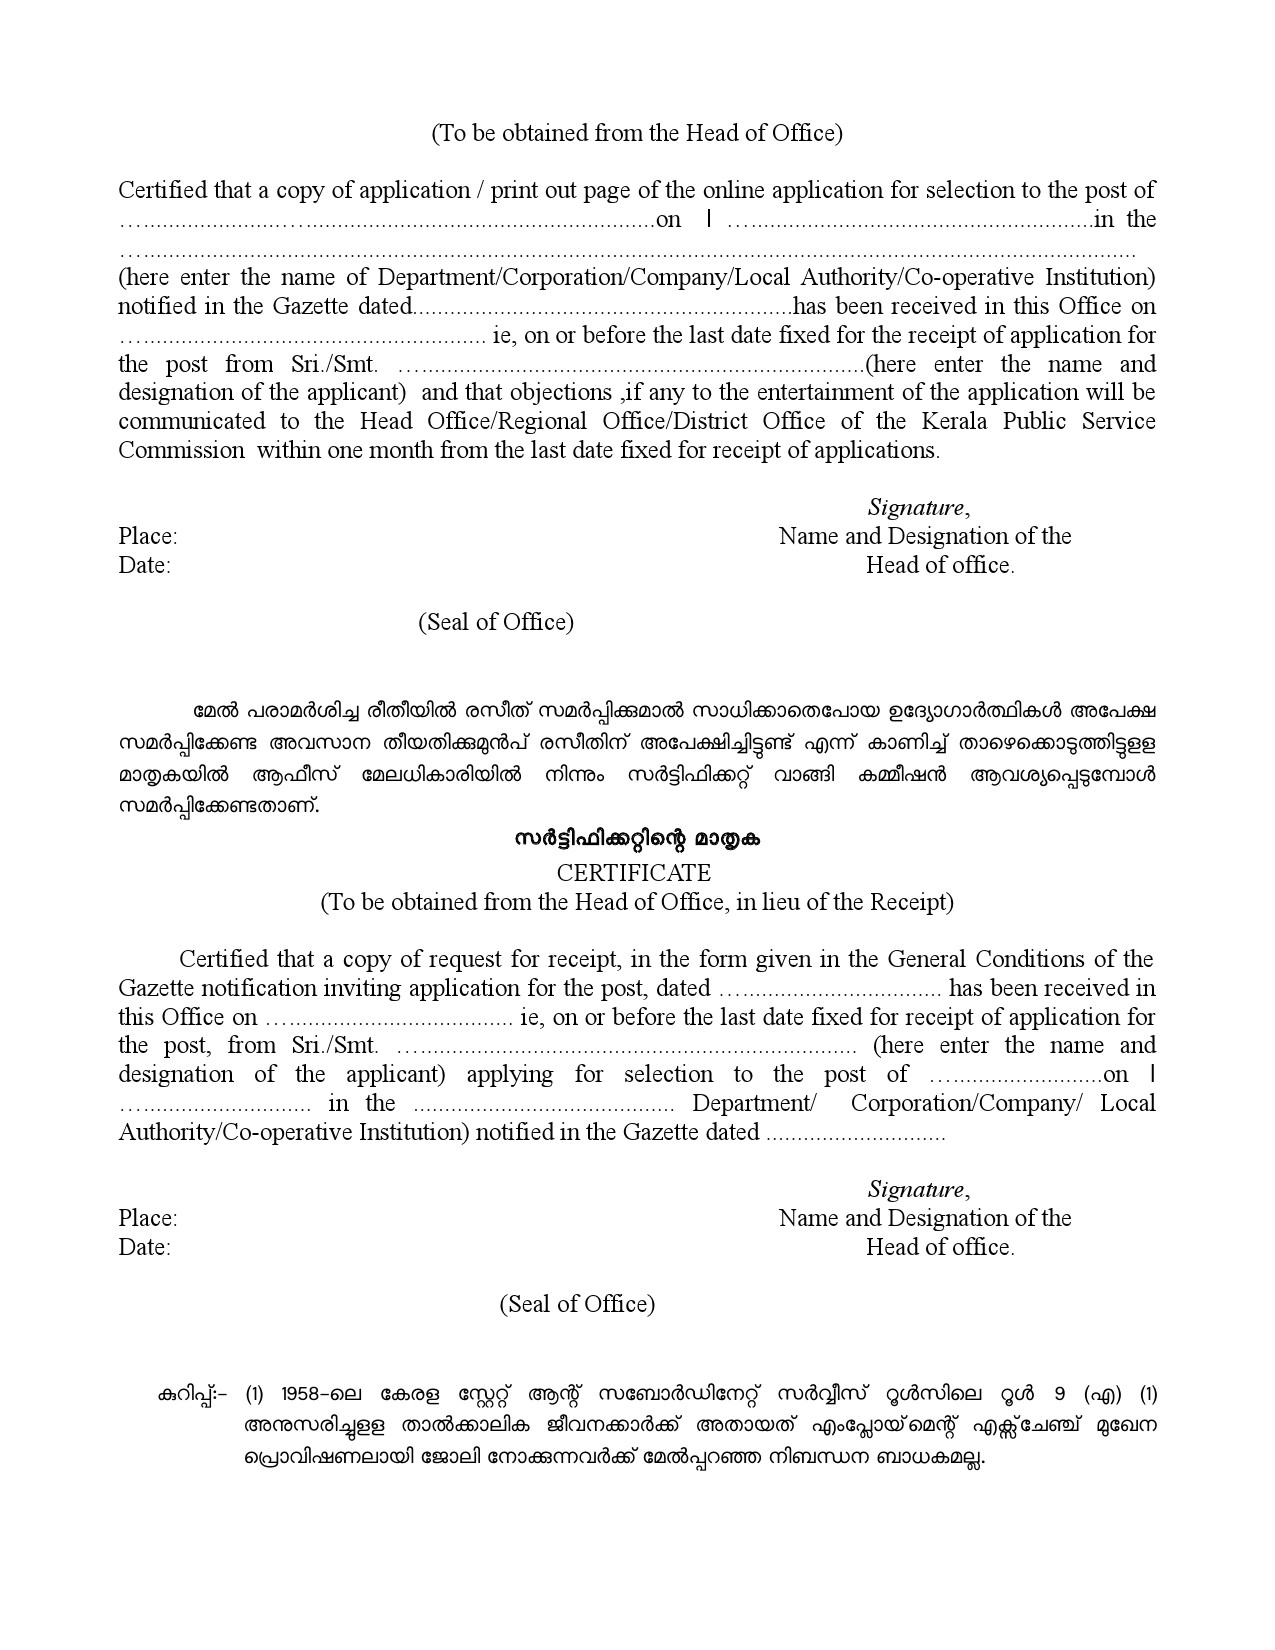 General Conditions and Certificate Formats in Malayalam - Notification Image 20